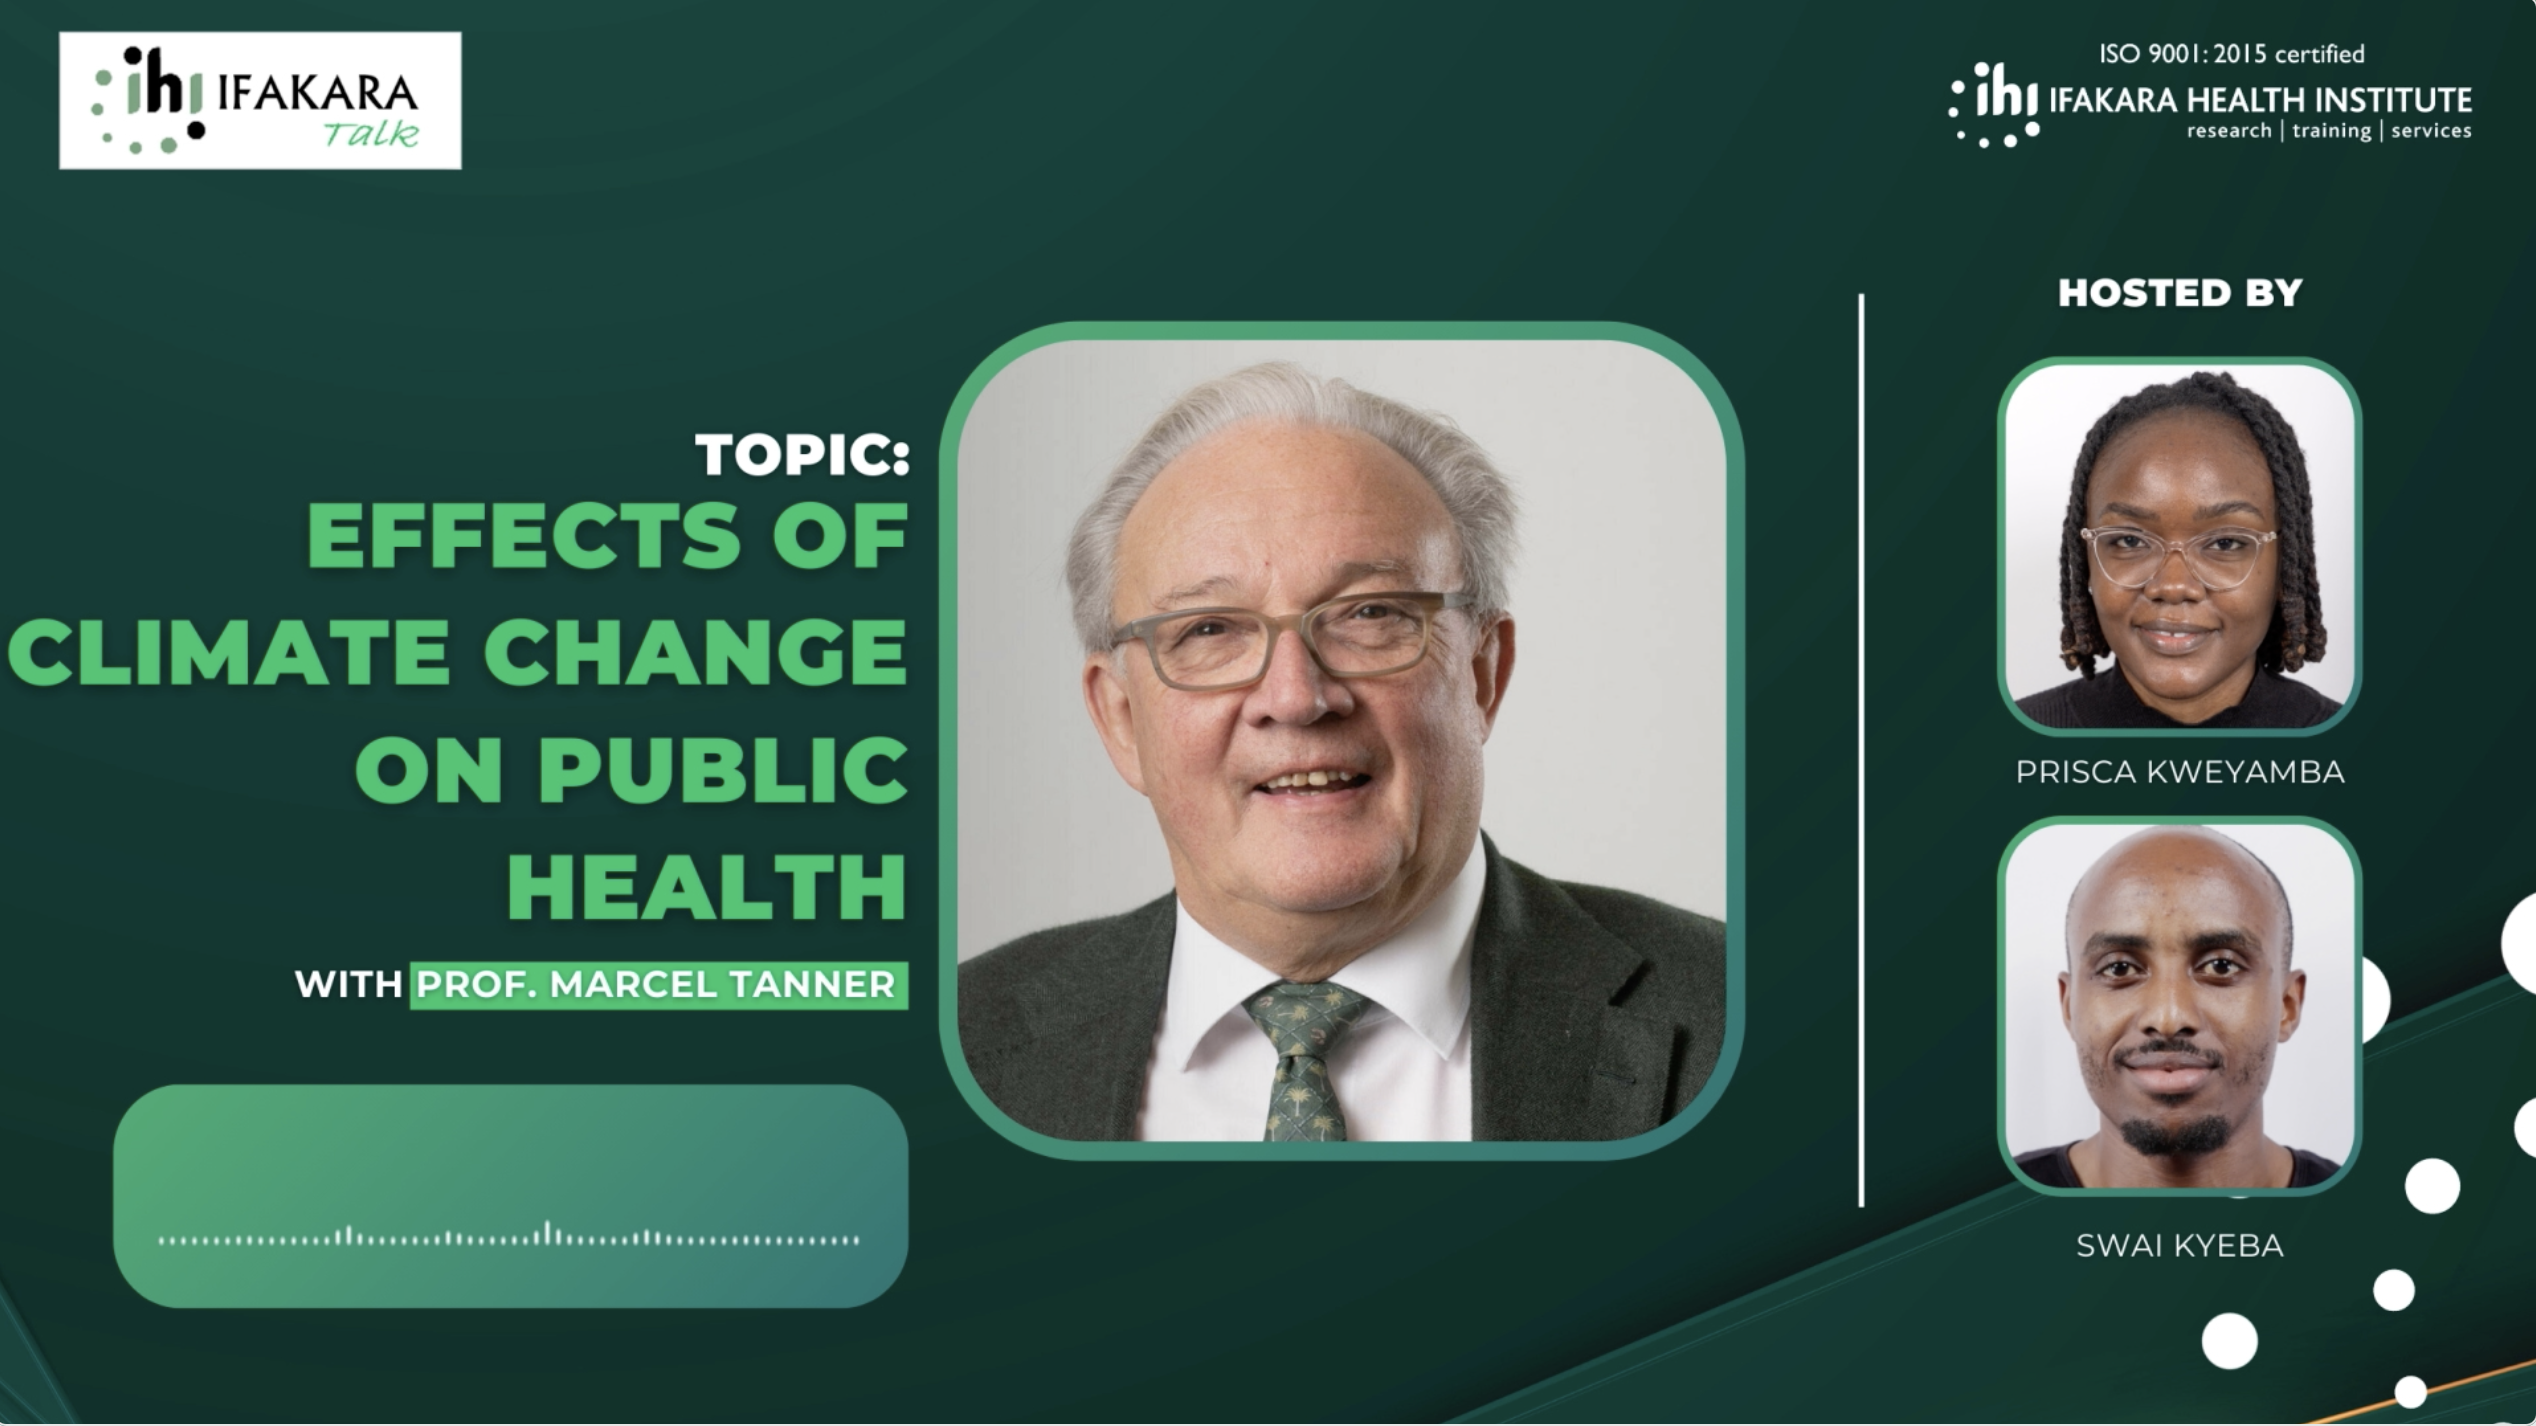 INSIGHTS:  Talk on effects of climate change on public health with Prof. Marcel Tanner